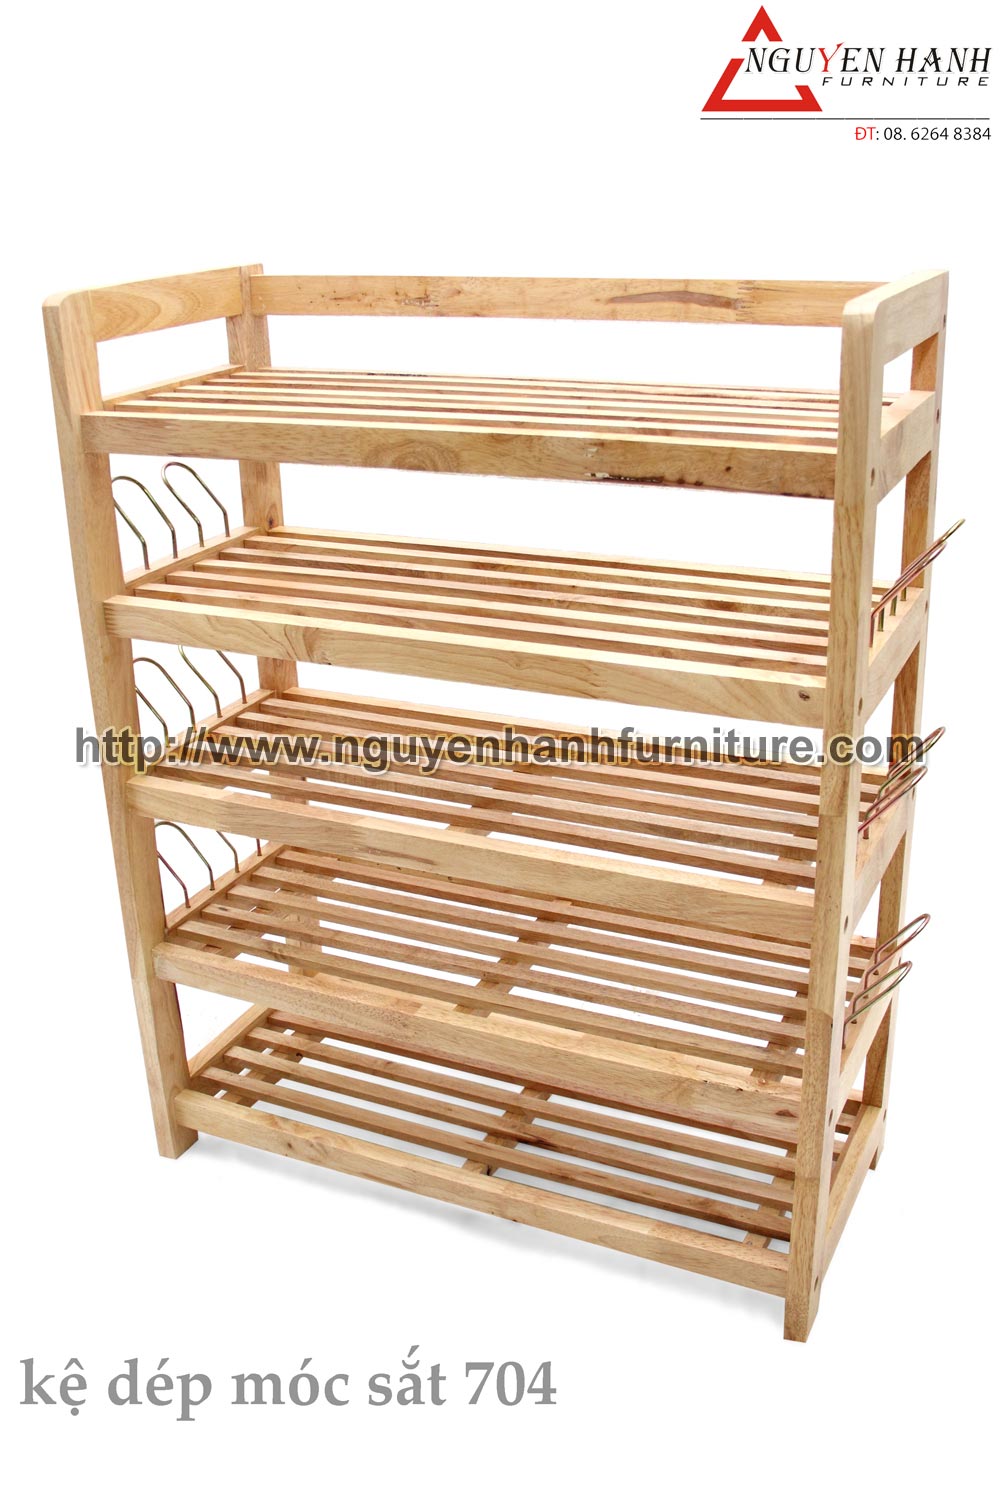 Name product: Shoeshelf with iron hooks 704 (Natural) - Dimensions: 63 x 30 x 79 (H) - Description: Wood natural rubber